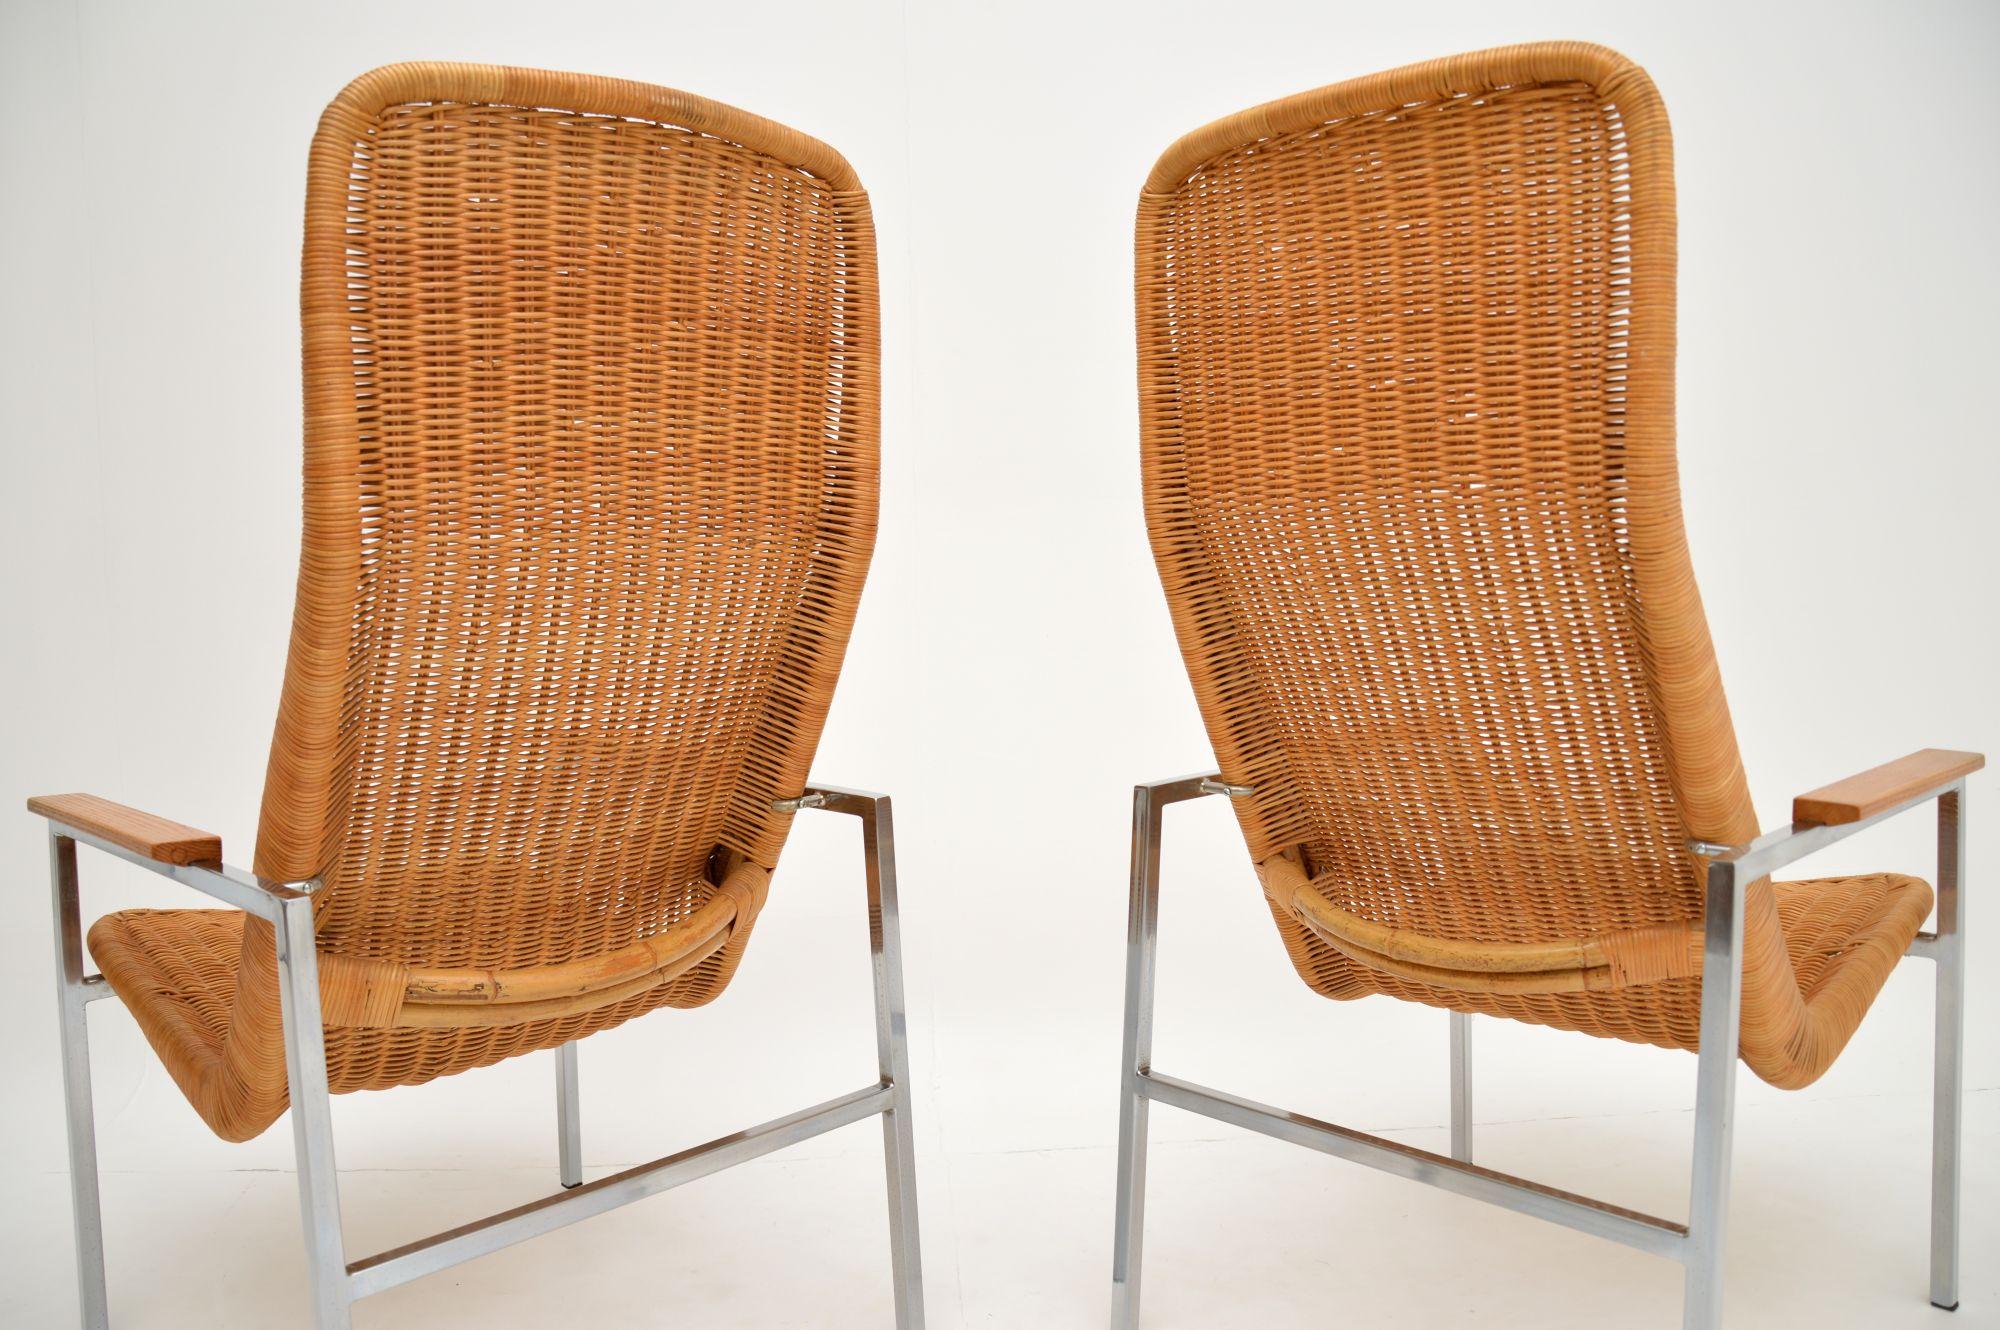 Pair of Vintage Chrome and Rattan Armchairs by Dirk Van Sliedrecht In Good Condition For Sale In London, GB